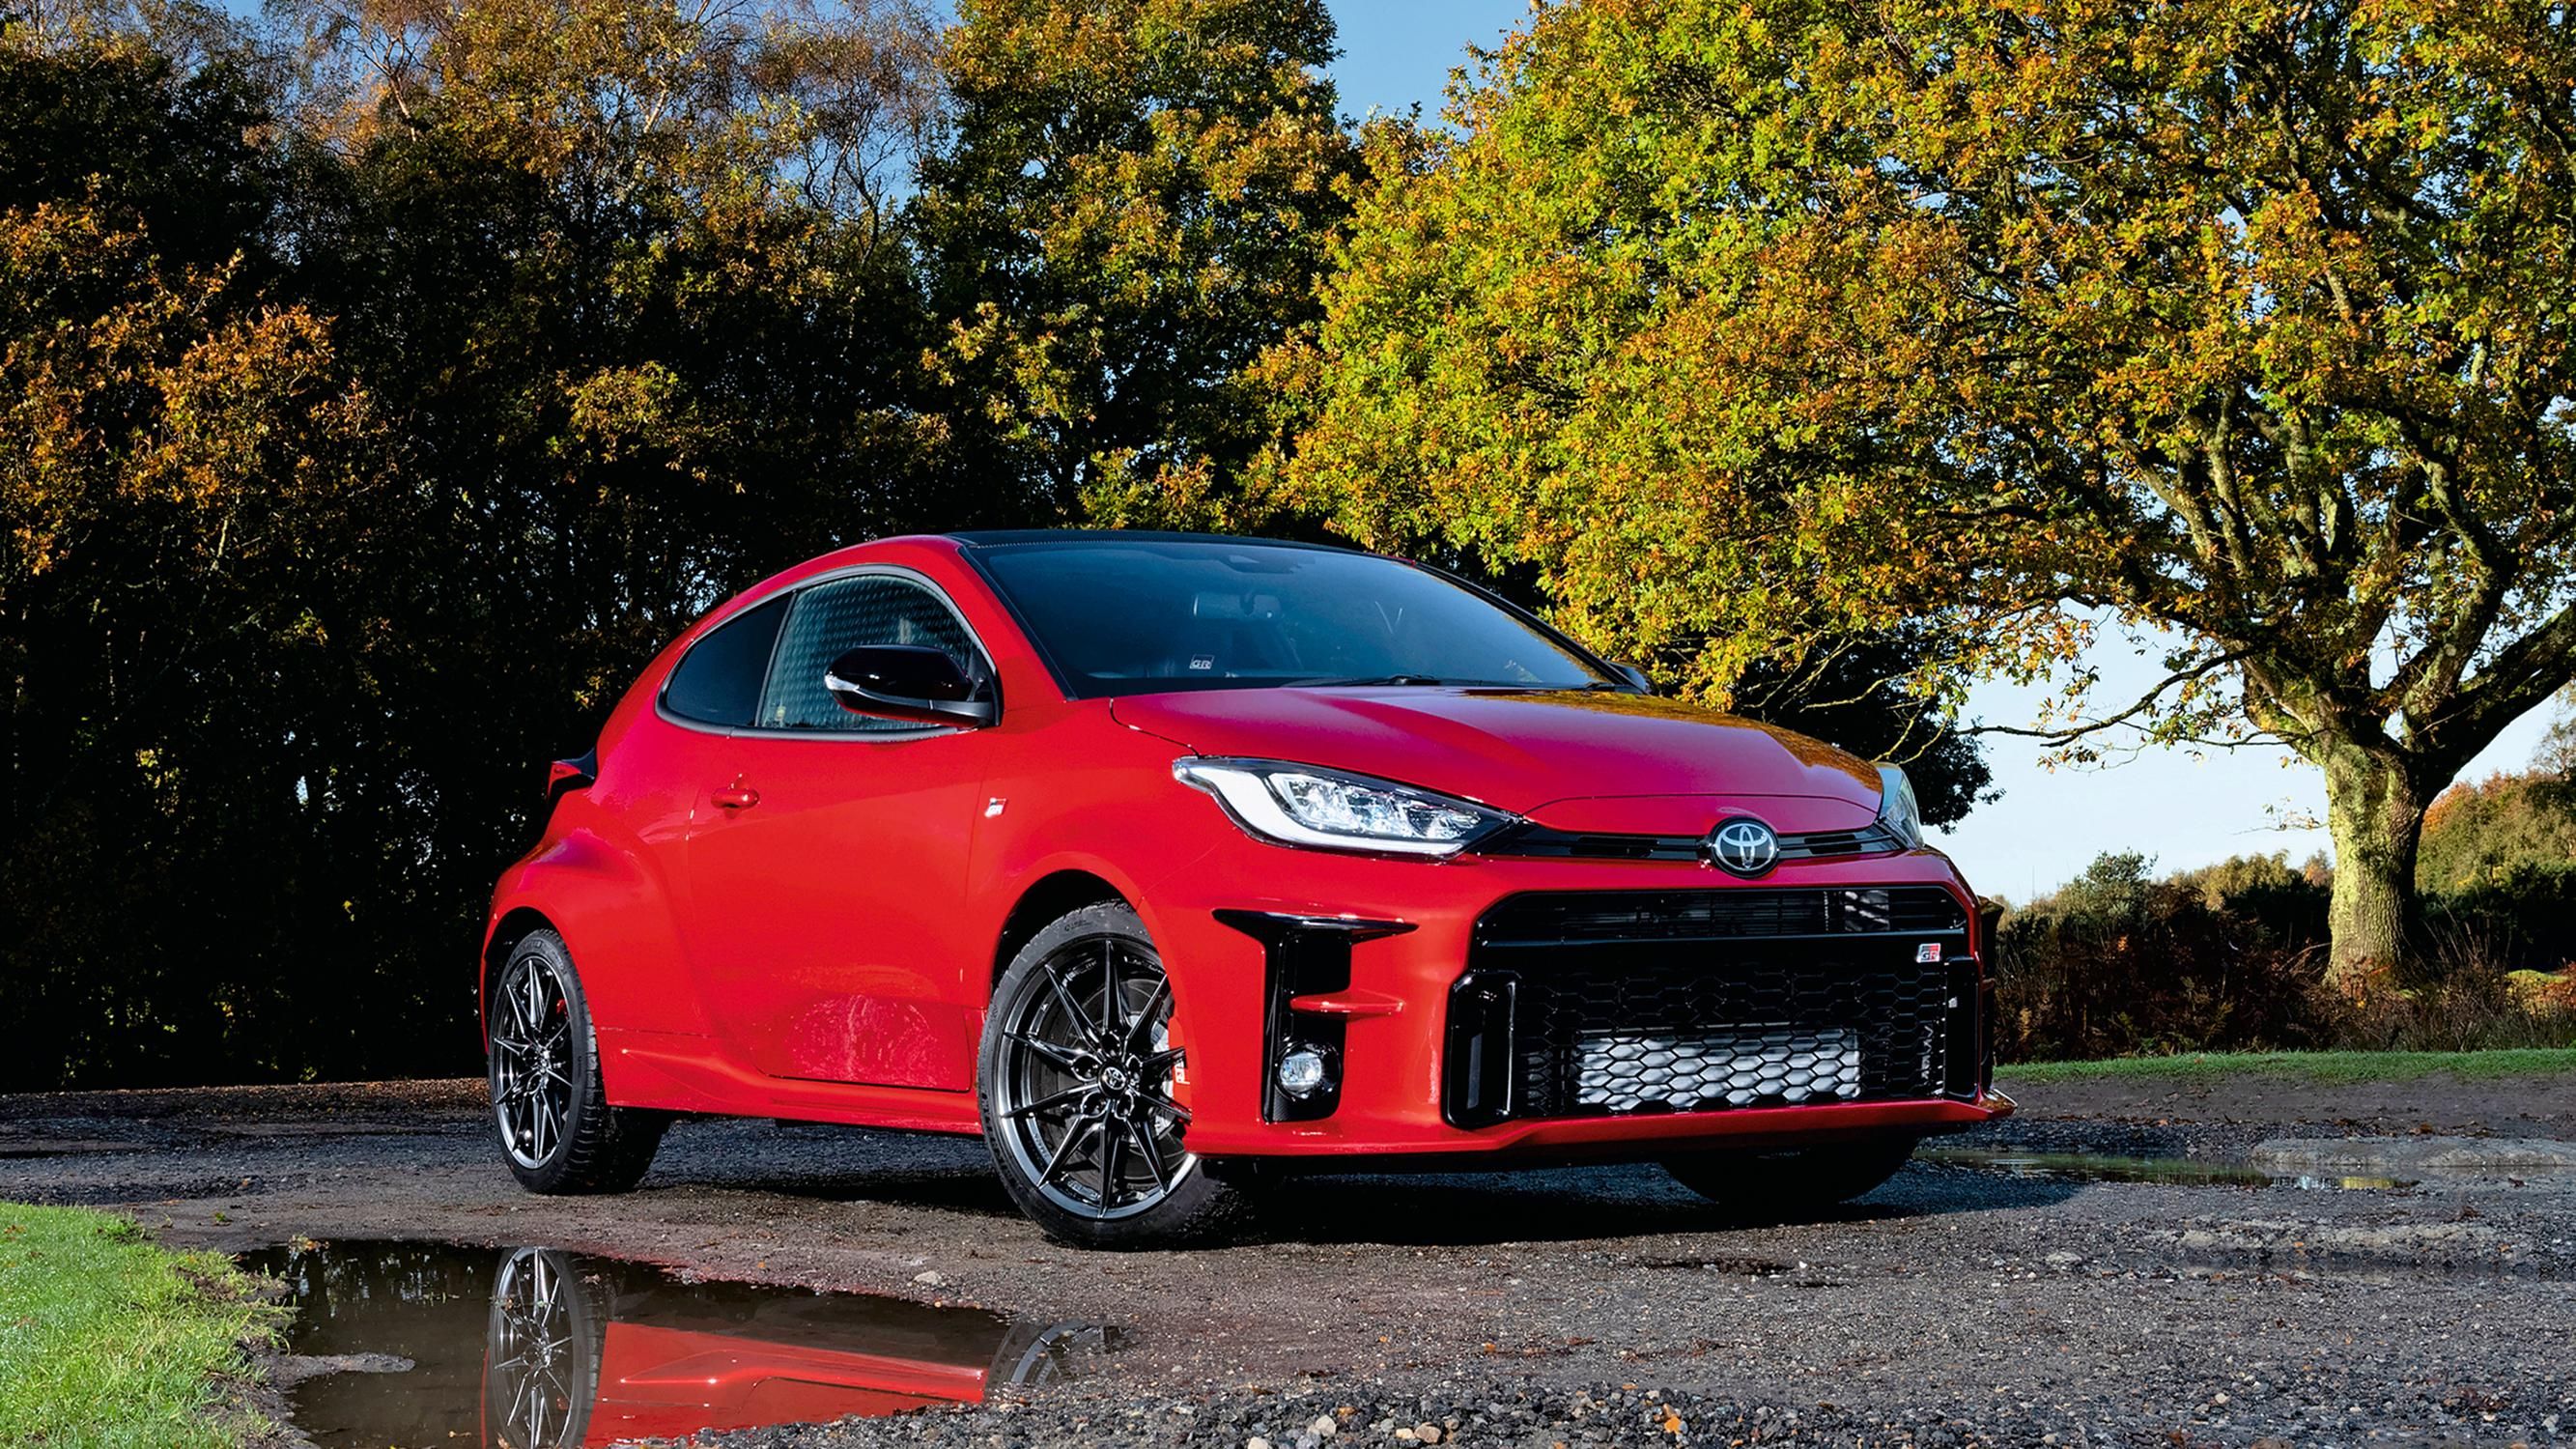 Toyota GR Yaris In Red - The Clarkson Review